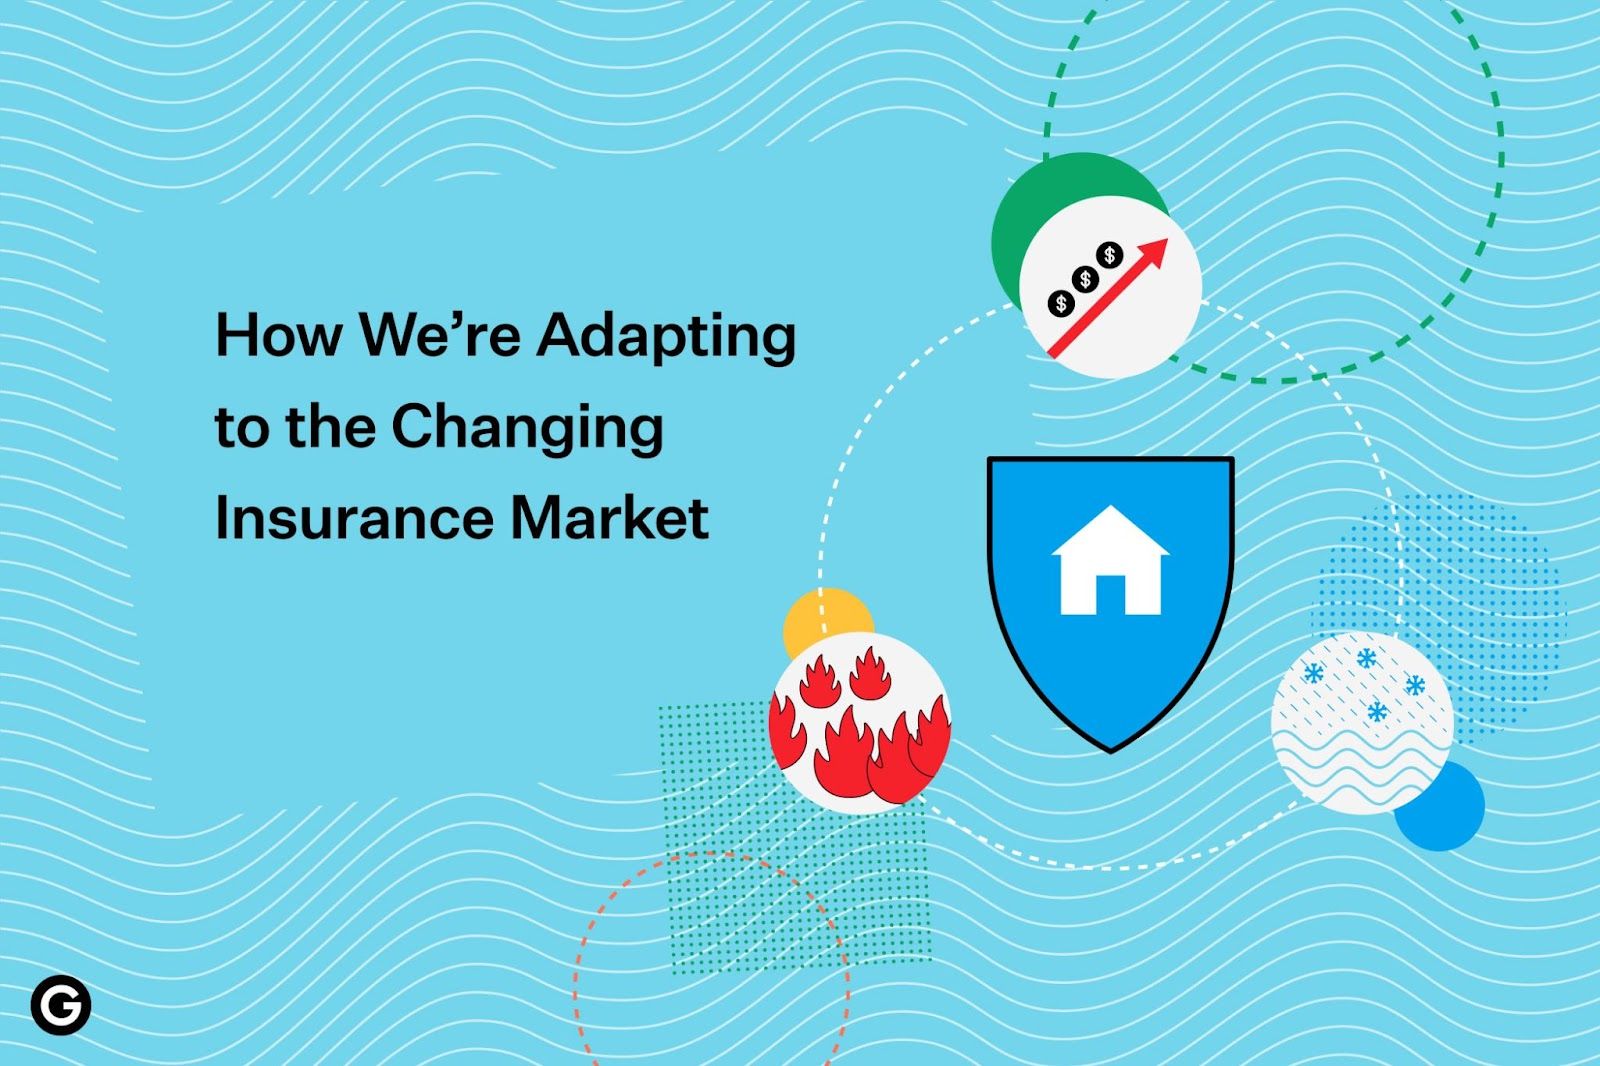 How Goodcover is Adapting to the Changing Insurance Market